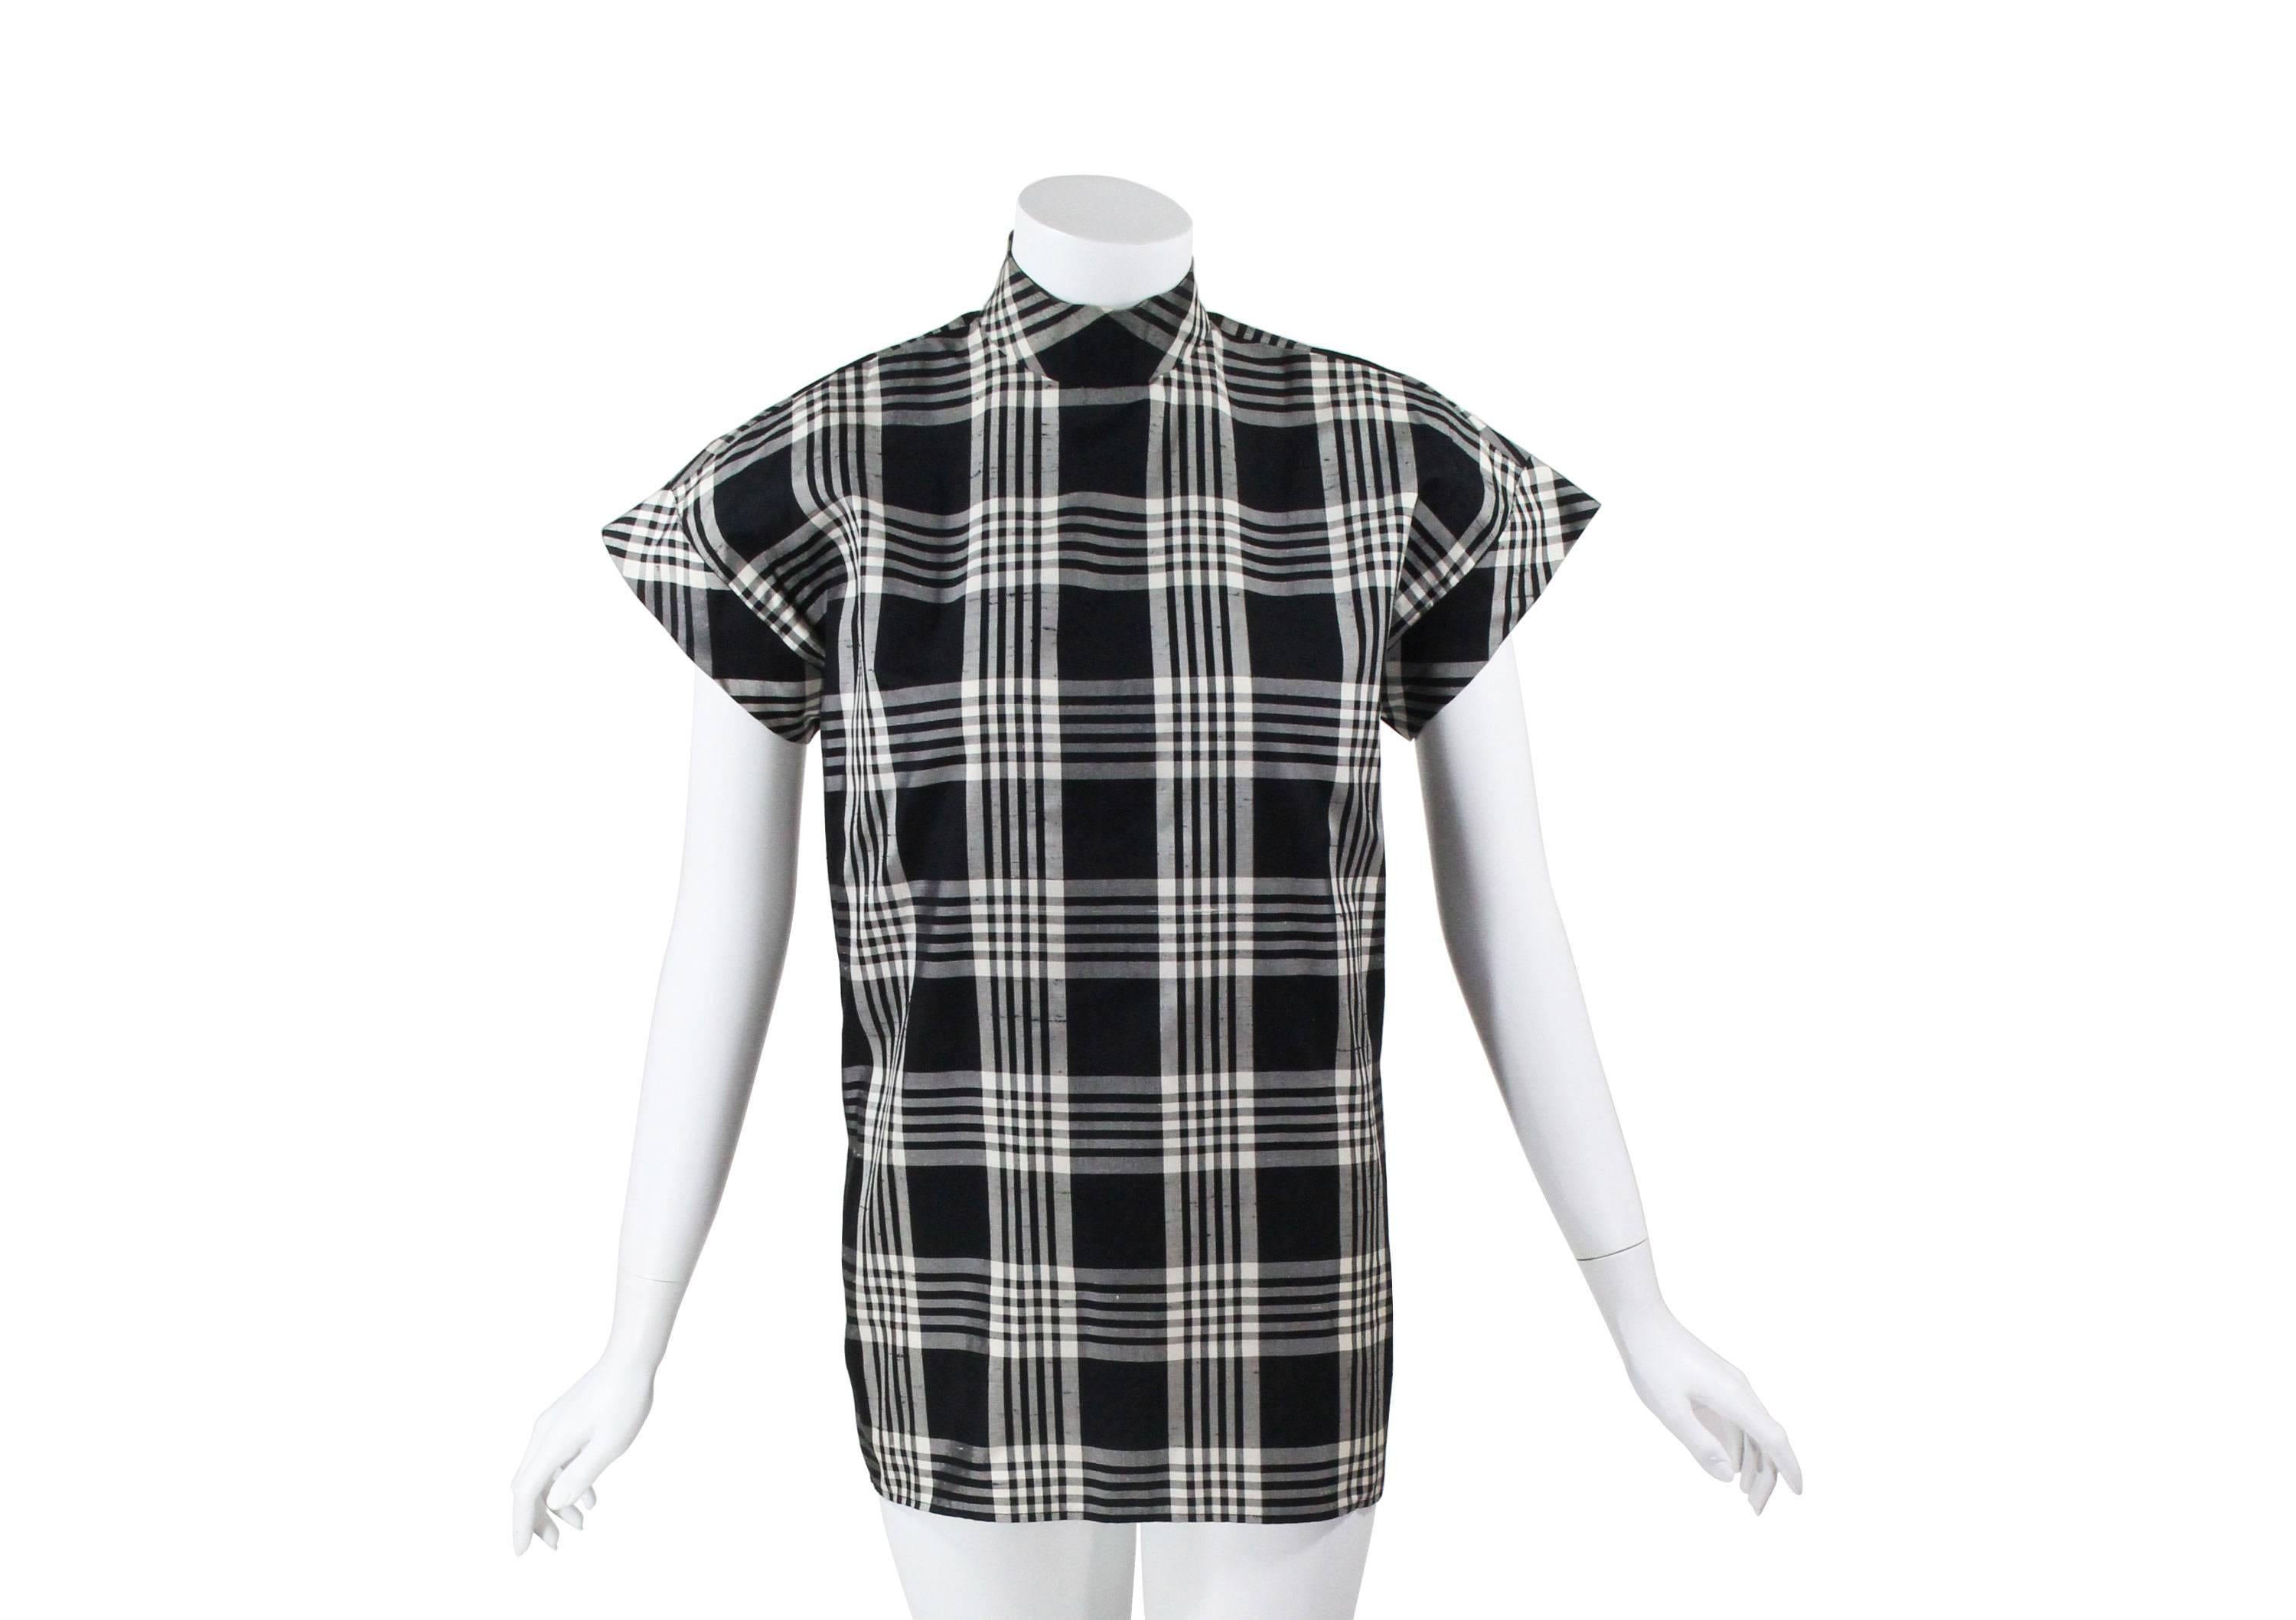 Women's 1970s Chanel Haute Couture Black and White Plaid Raw Silk Top Blouse